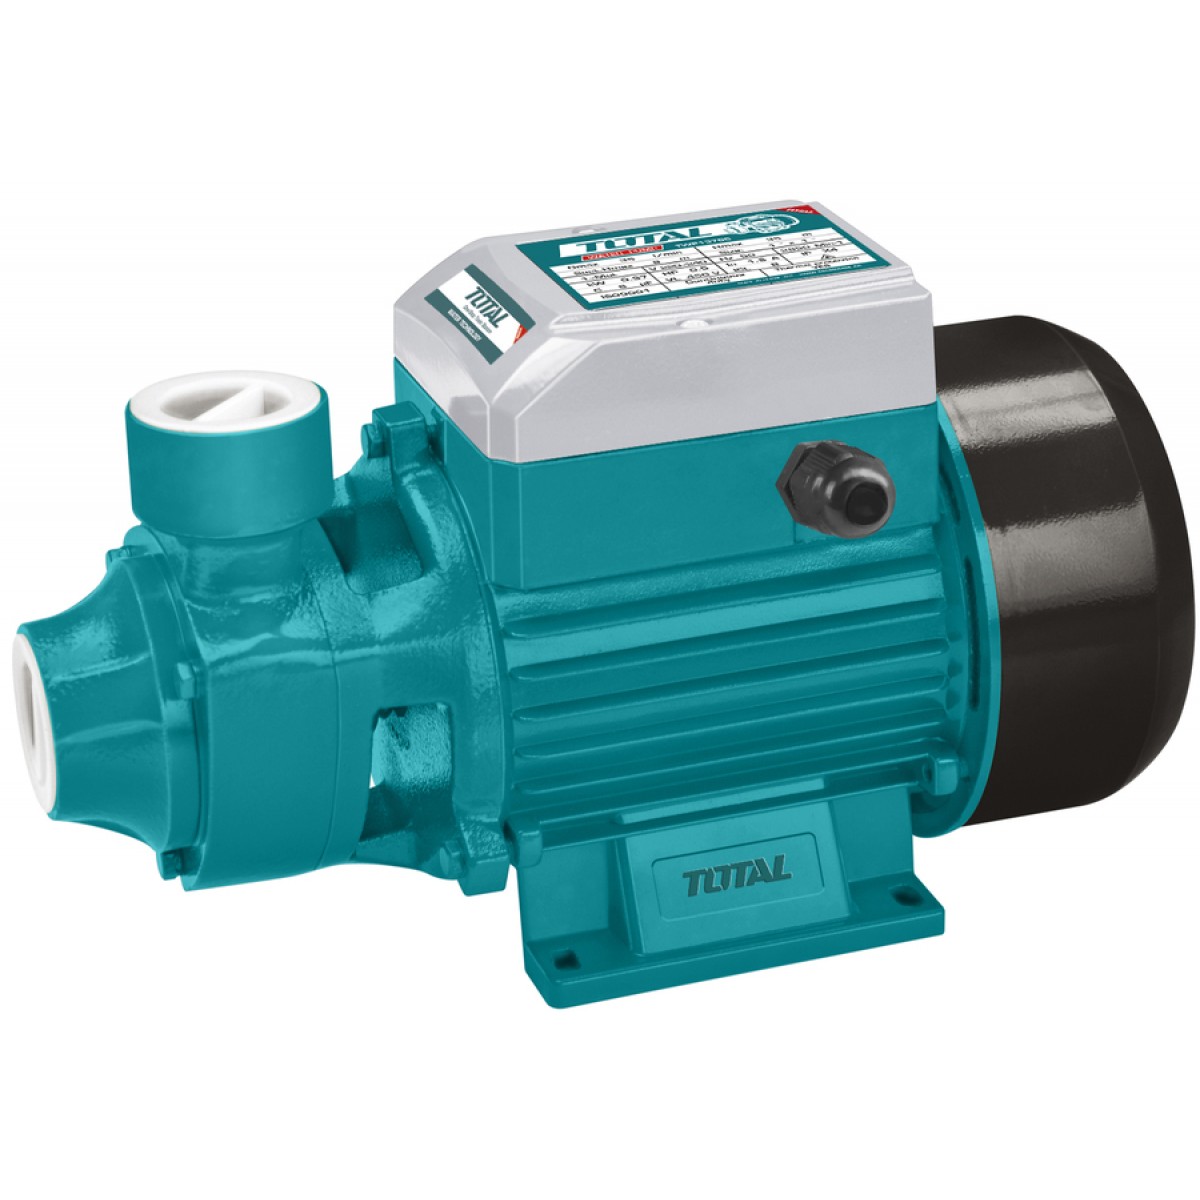 TOTAL TWP17501 SURFACE PUMP 750W